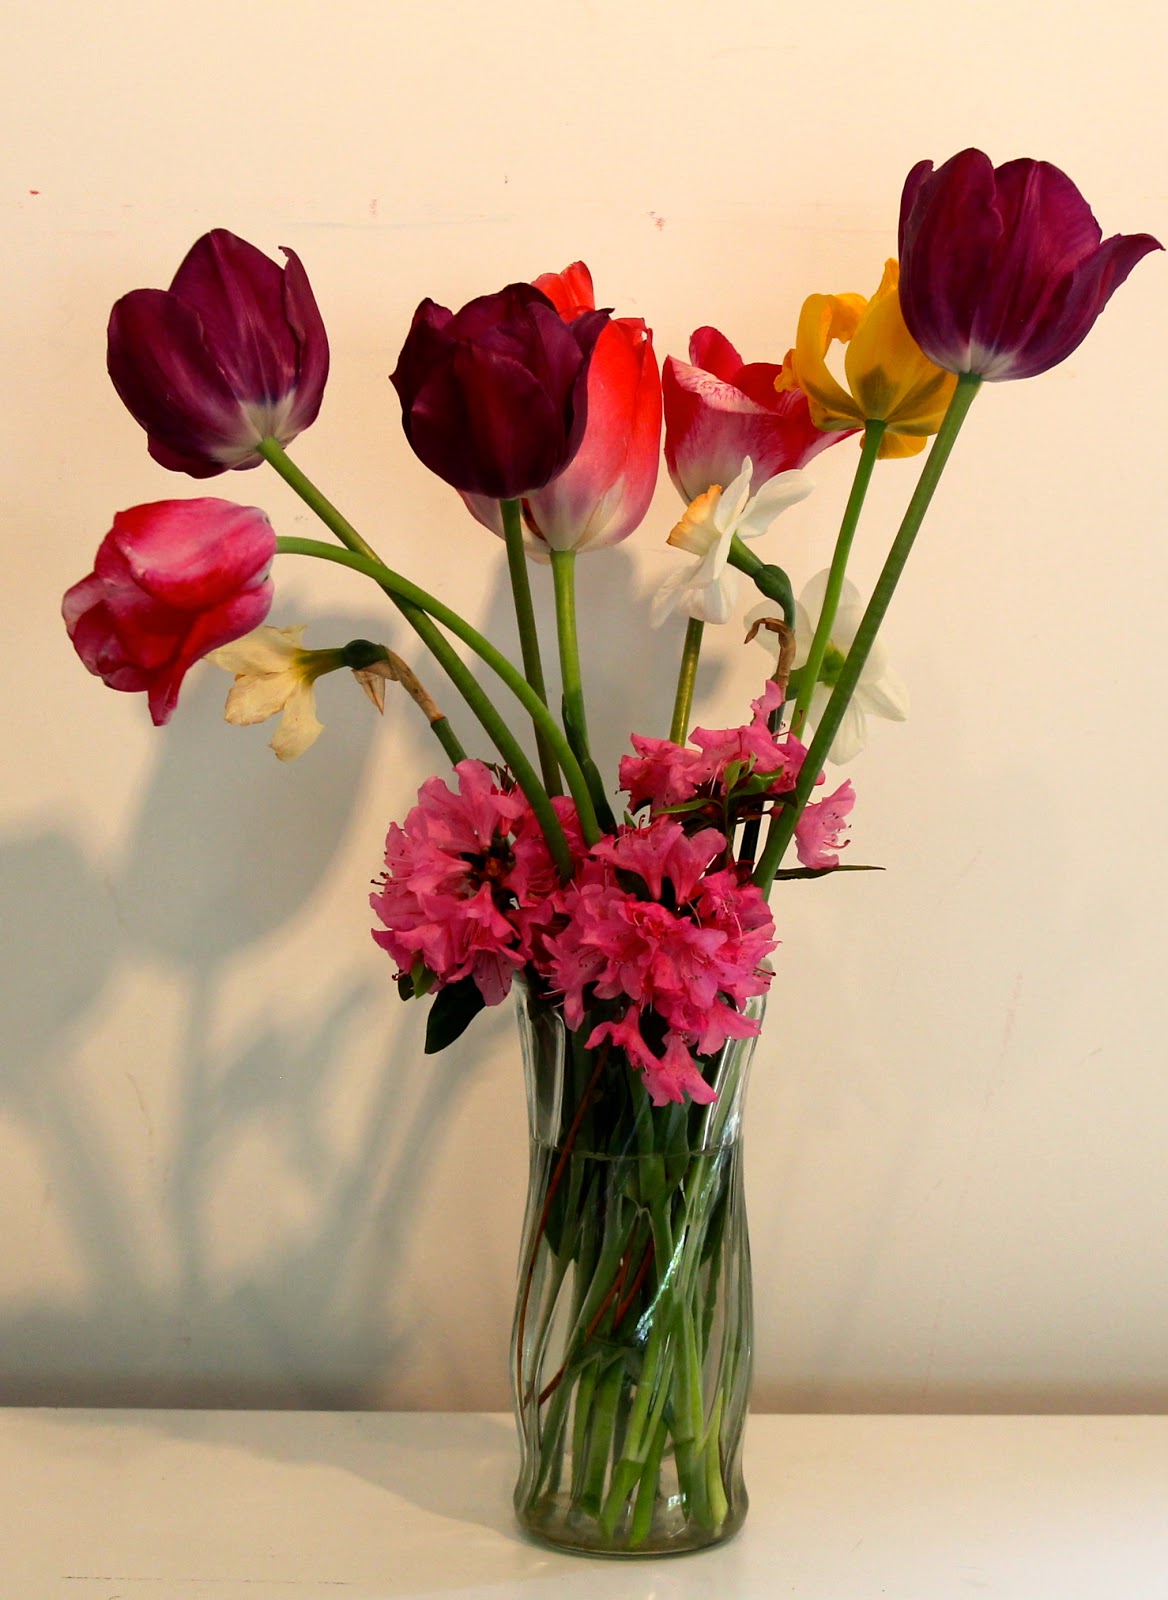 This week there were several bouquets to choose from: Tulips from Xuan ...